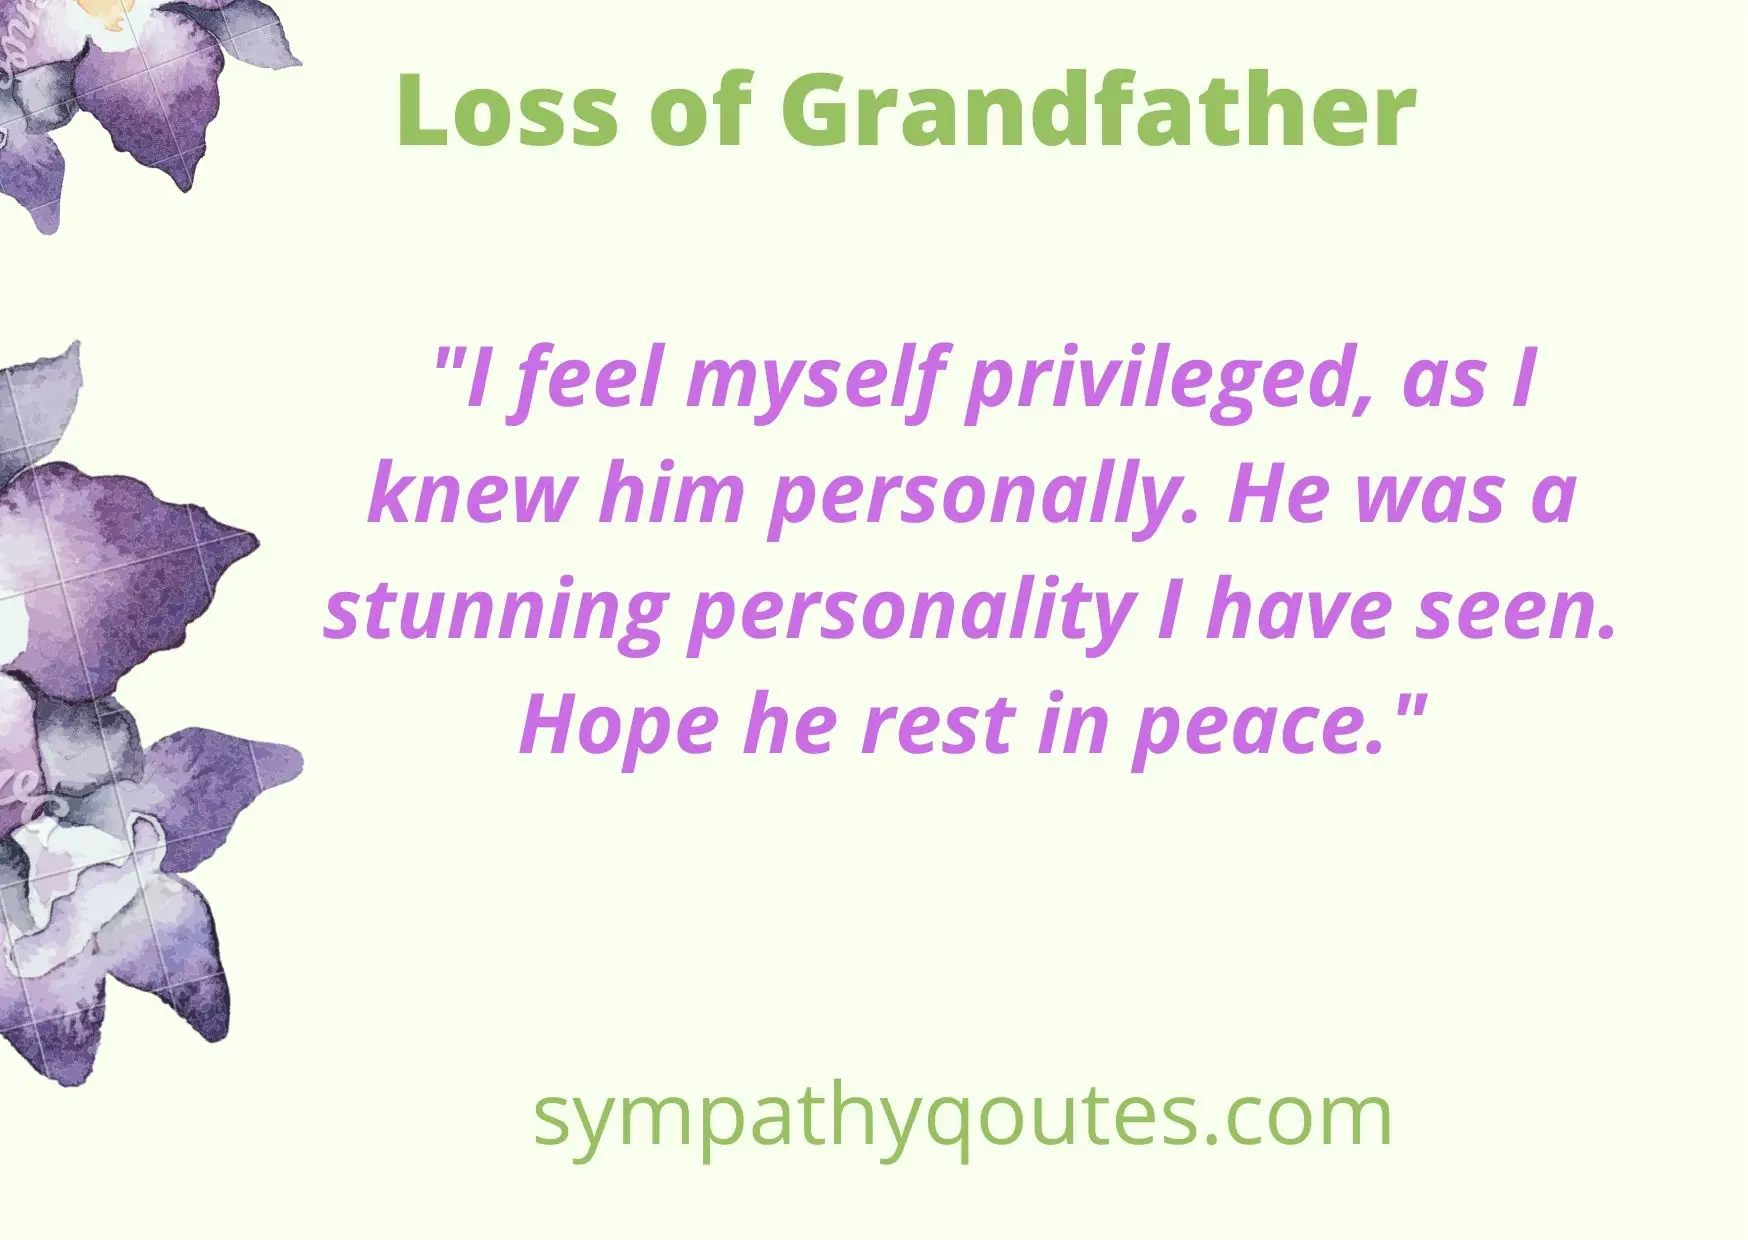 Condolence Messages for Loss of Grandfather